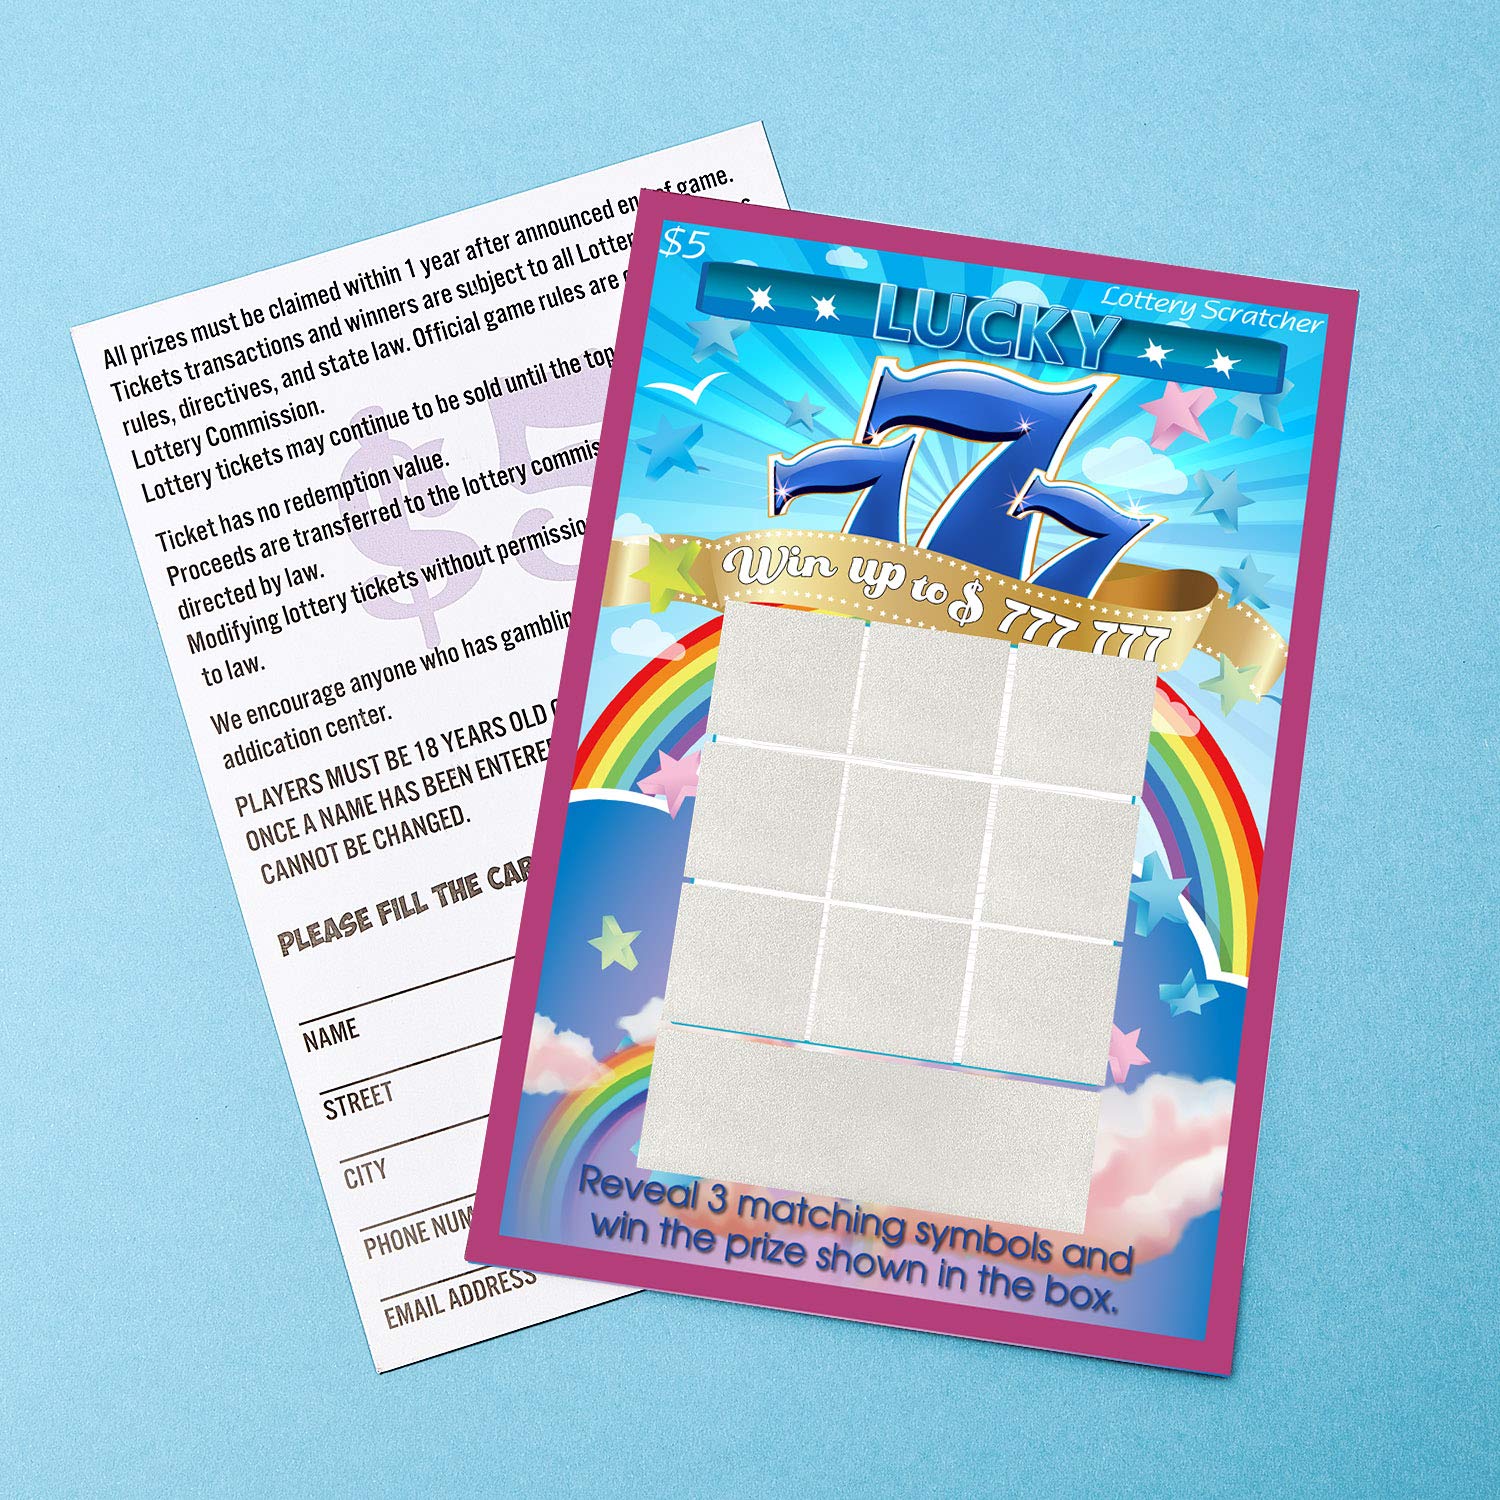 20 Pieces Pregnancy Announcement Cards Baby Announcement Fake Lottery Scratchers Tickets Novel Birth Reveal Fake Lottery Scratchcards to Make an Pregnancy Announcement Surprise Your Family Friends